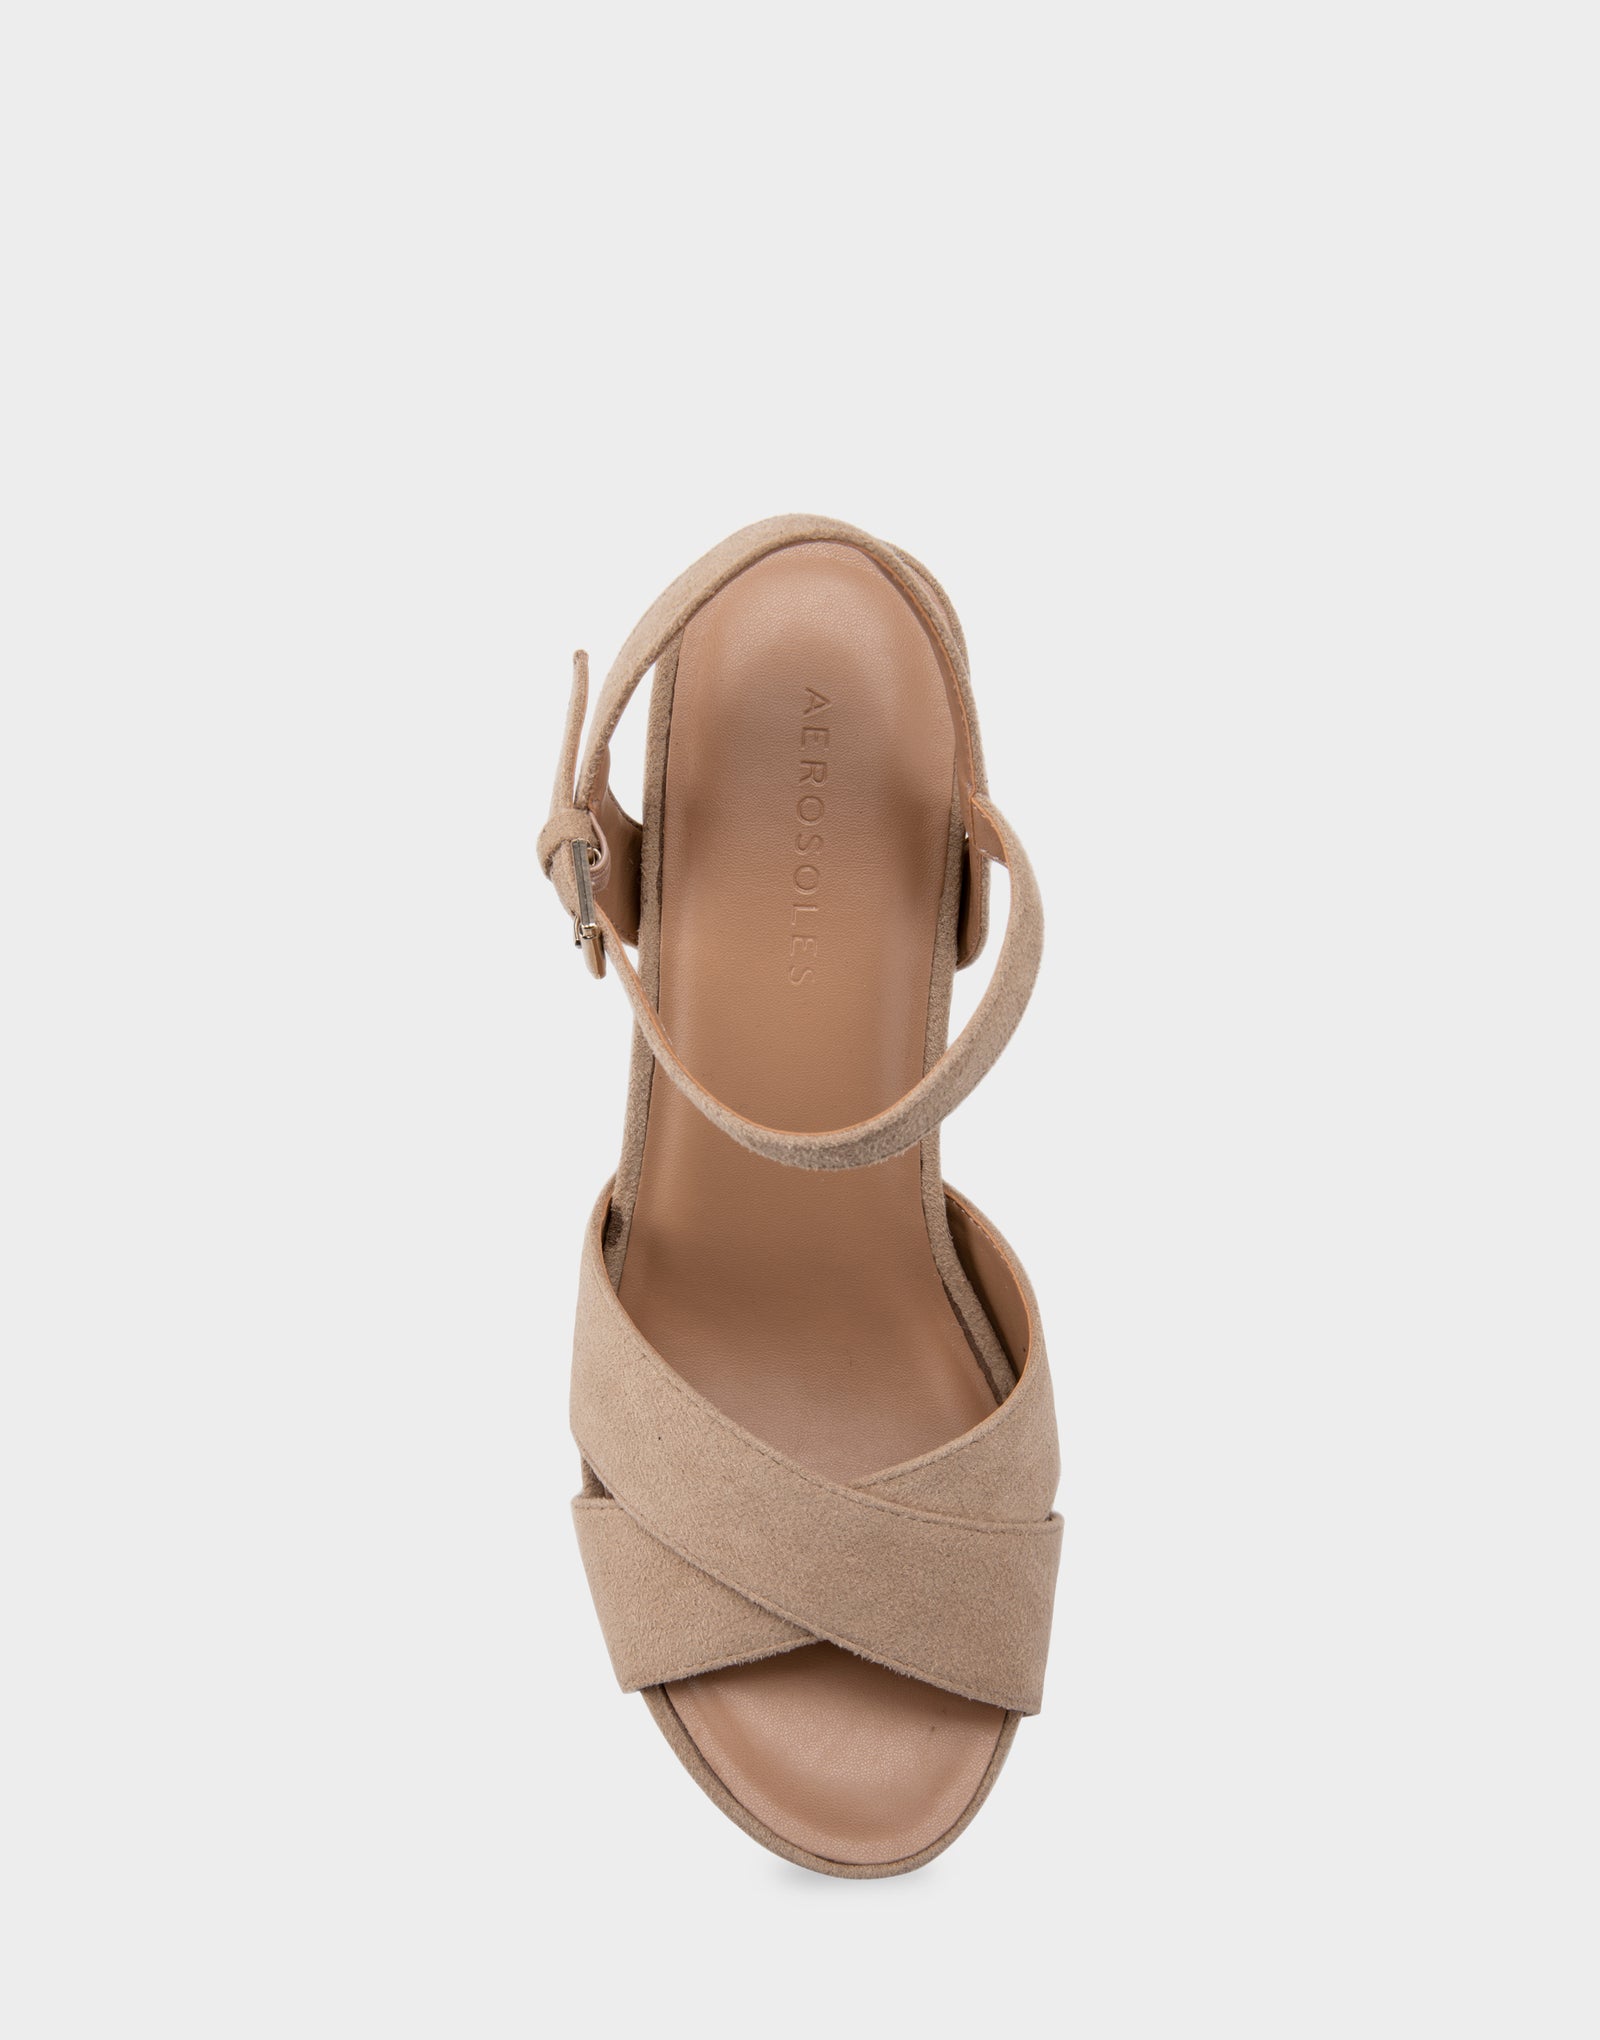 Women's Wedge in Taupe